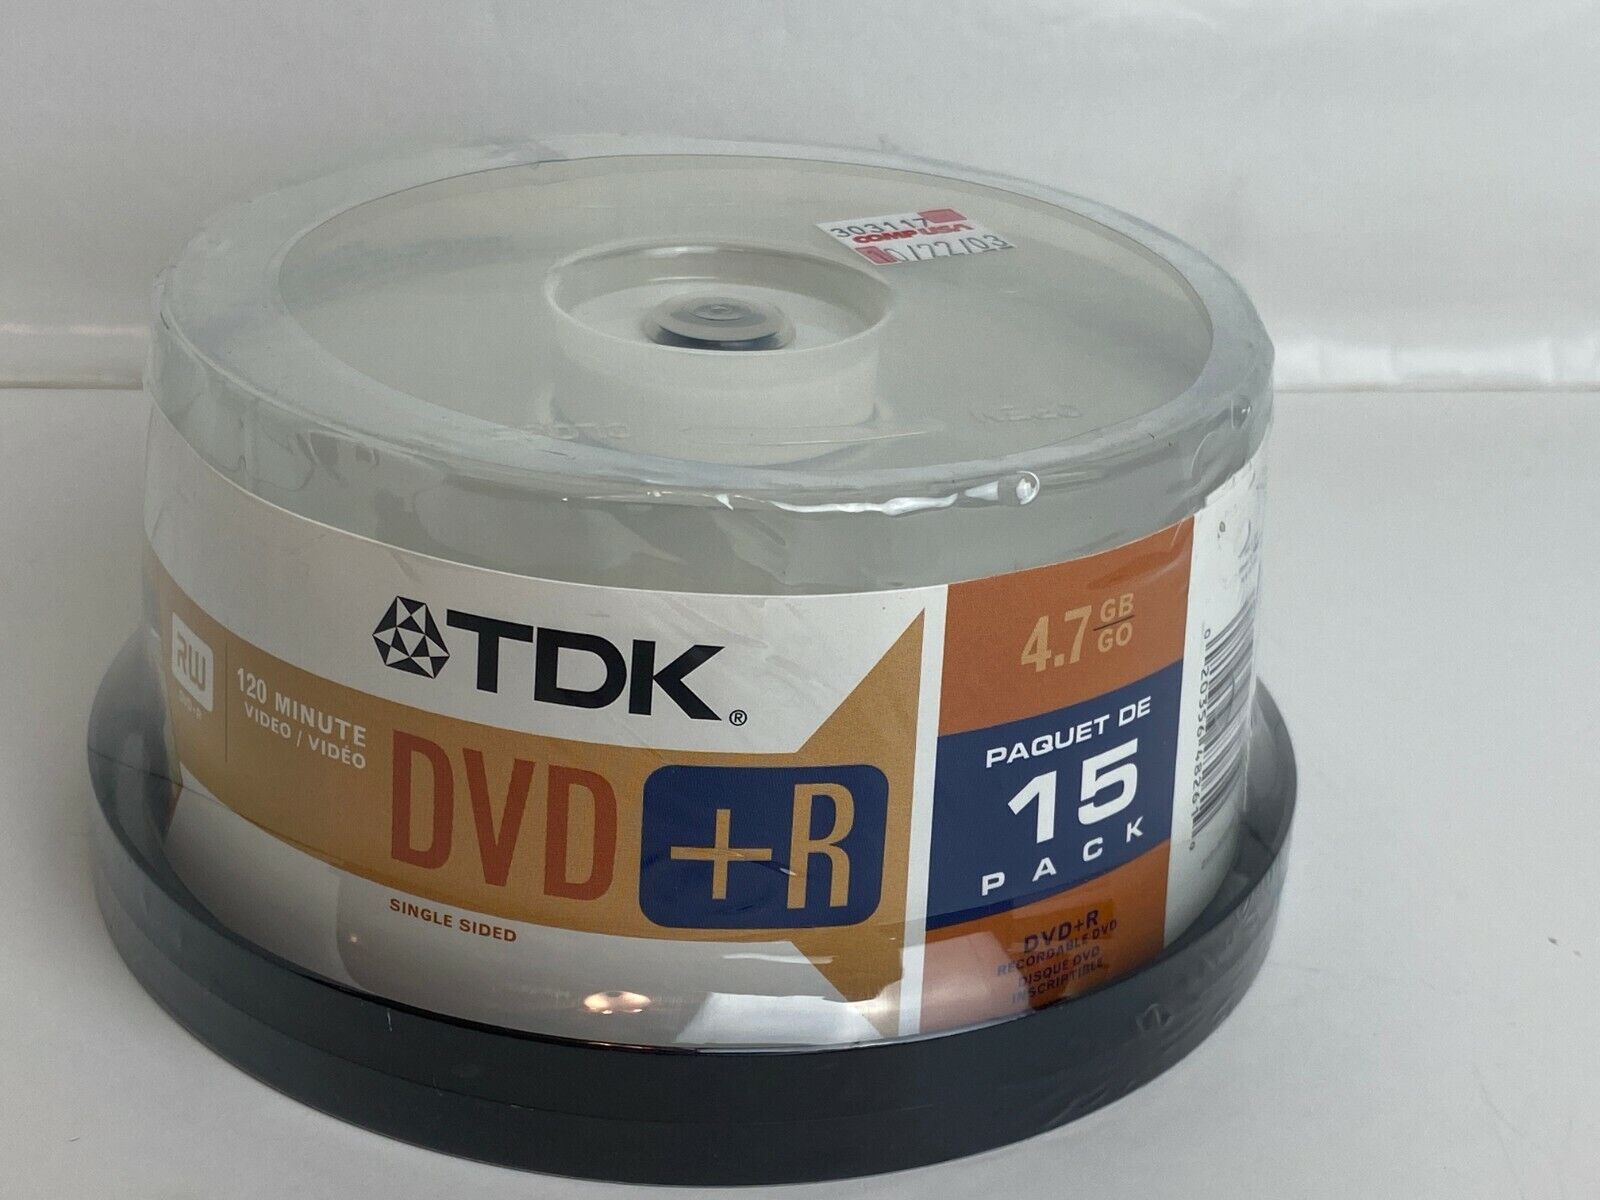 TDK DVD+R 4X 120 Minute 4.7 GB 15 Pack Recordable Single-Side Fast 